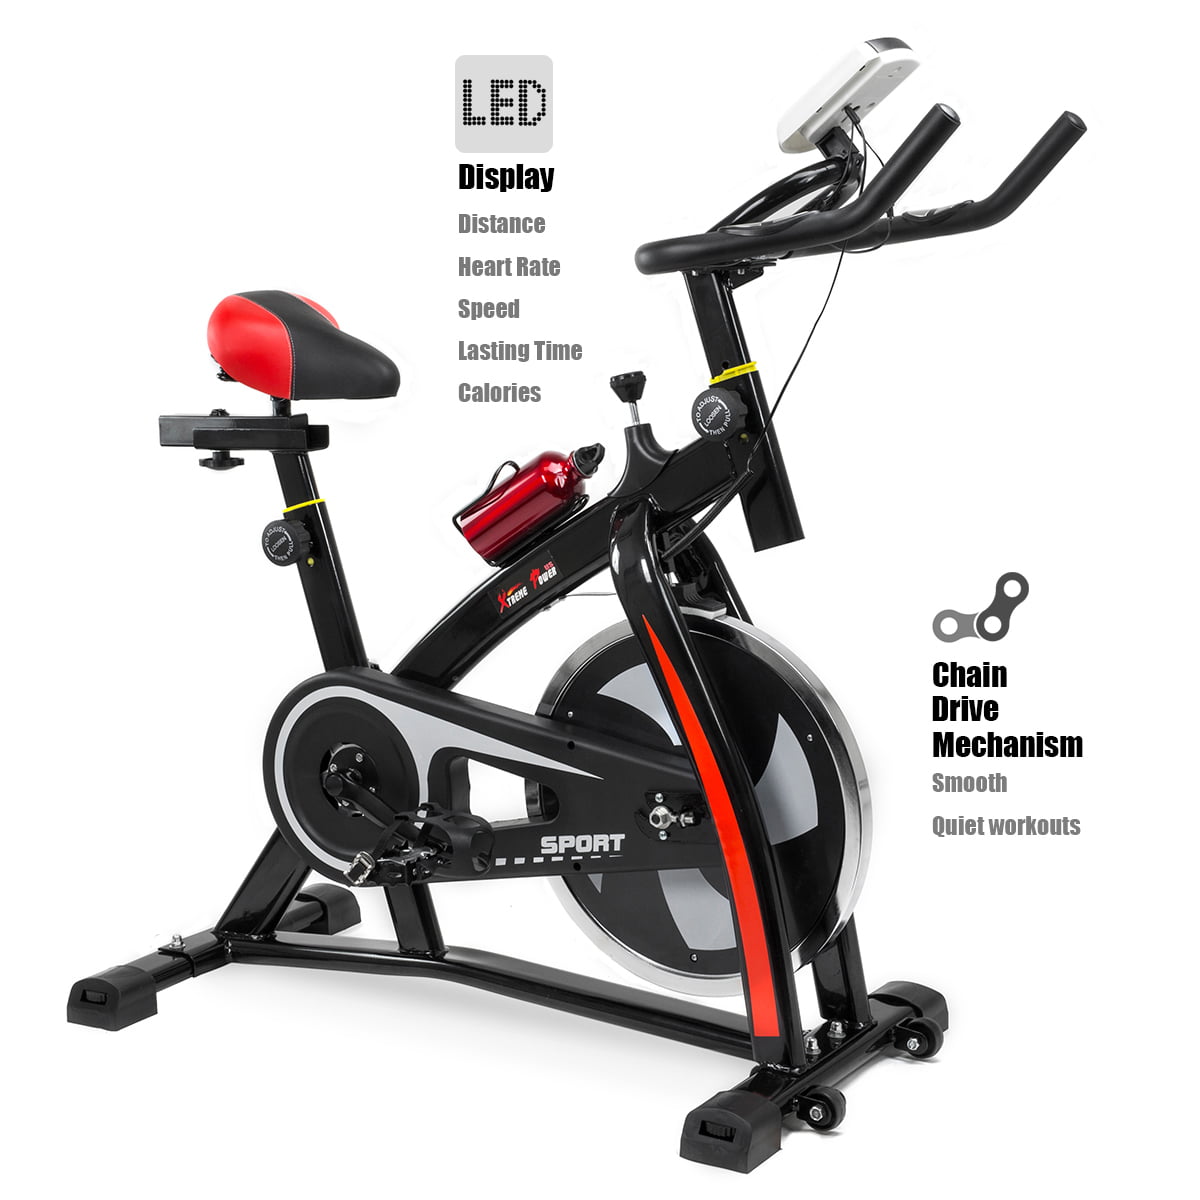 Details about   Stationary Exercise Bicycle Indoor Bike Cardio Health Cycling Home Fitness LED 